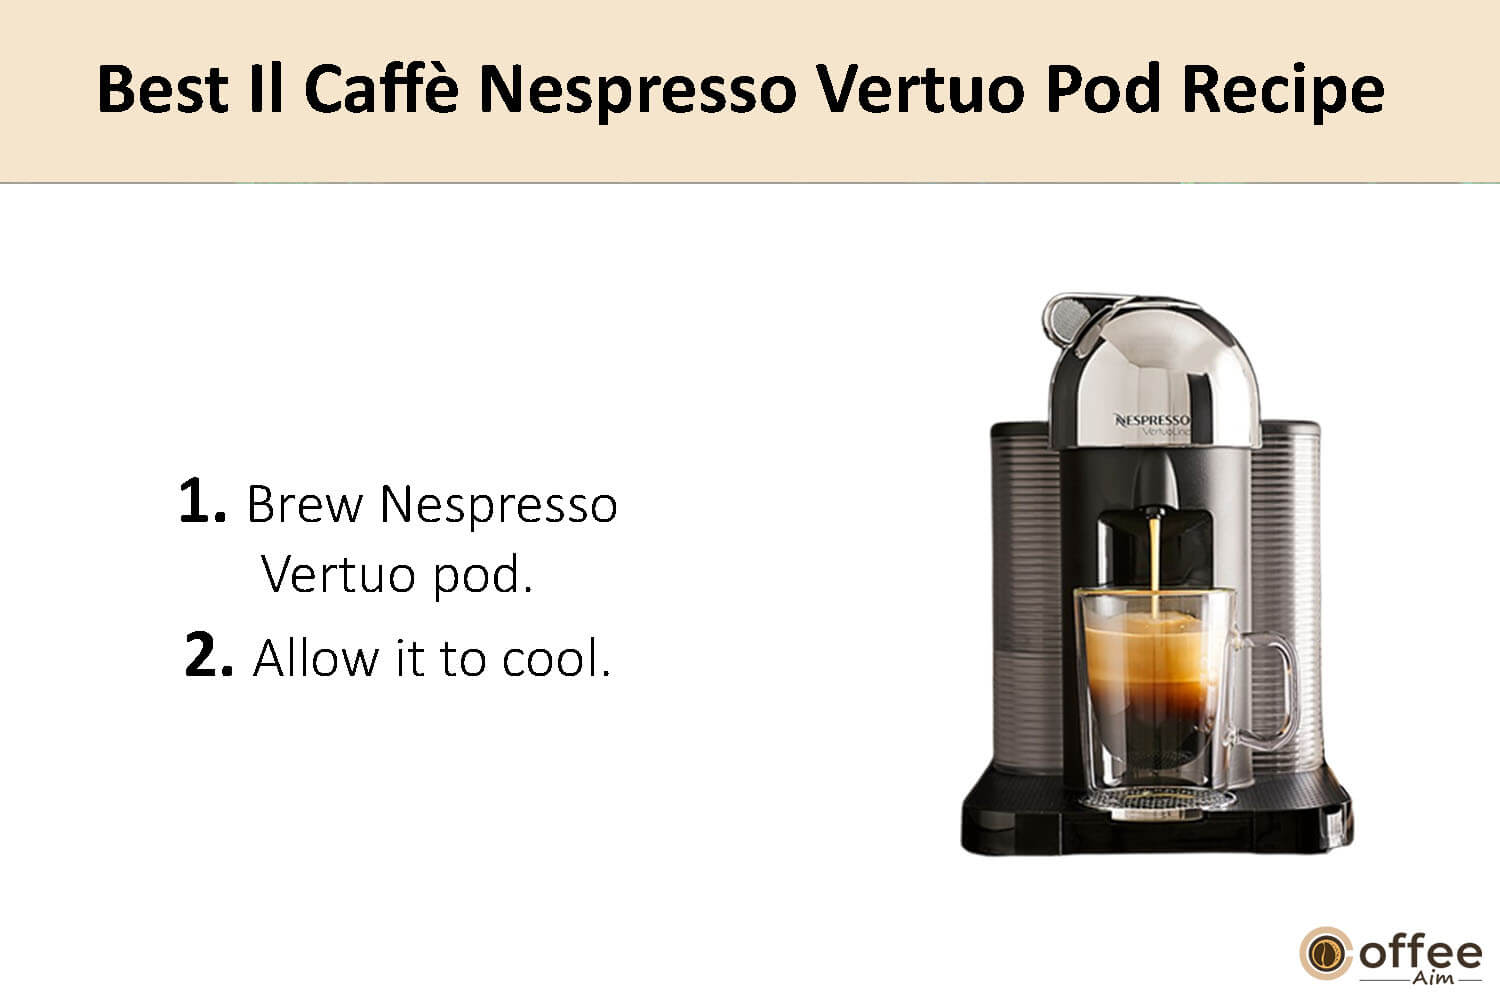 In this image, I clarify the preparation instructions for crafting the finest Nespresso Vertuo coffee pod.